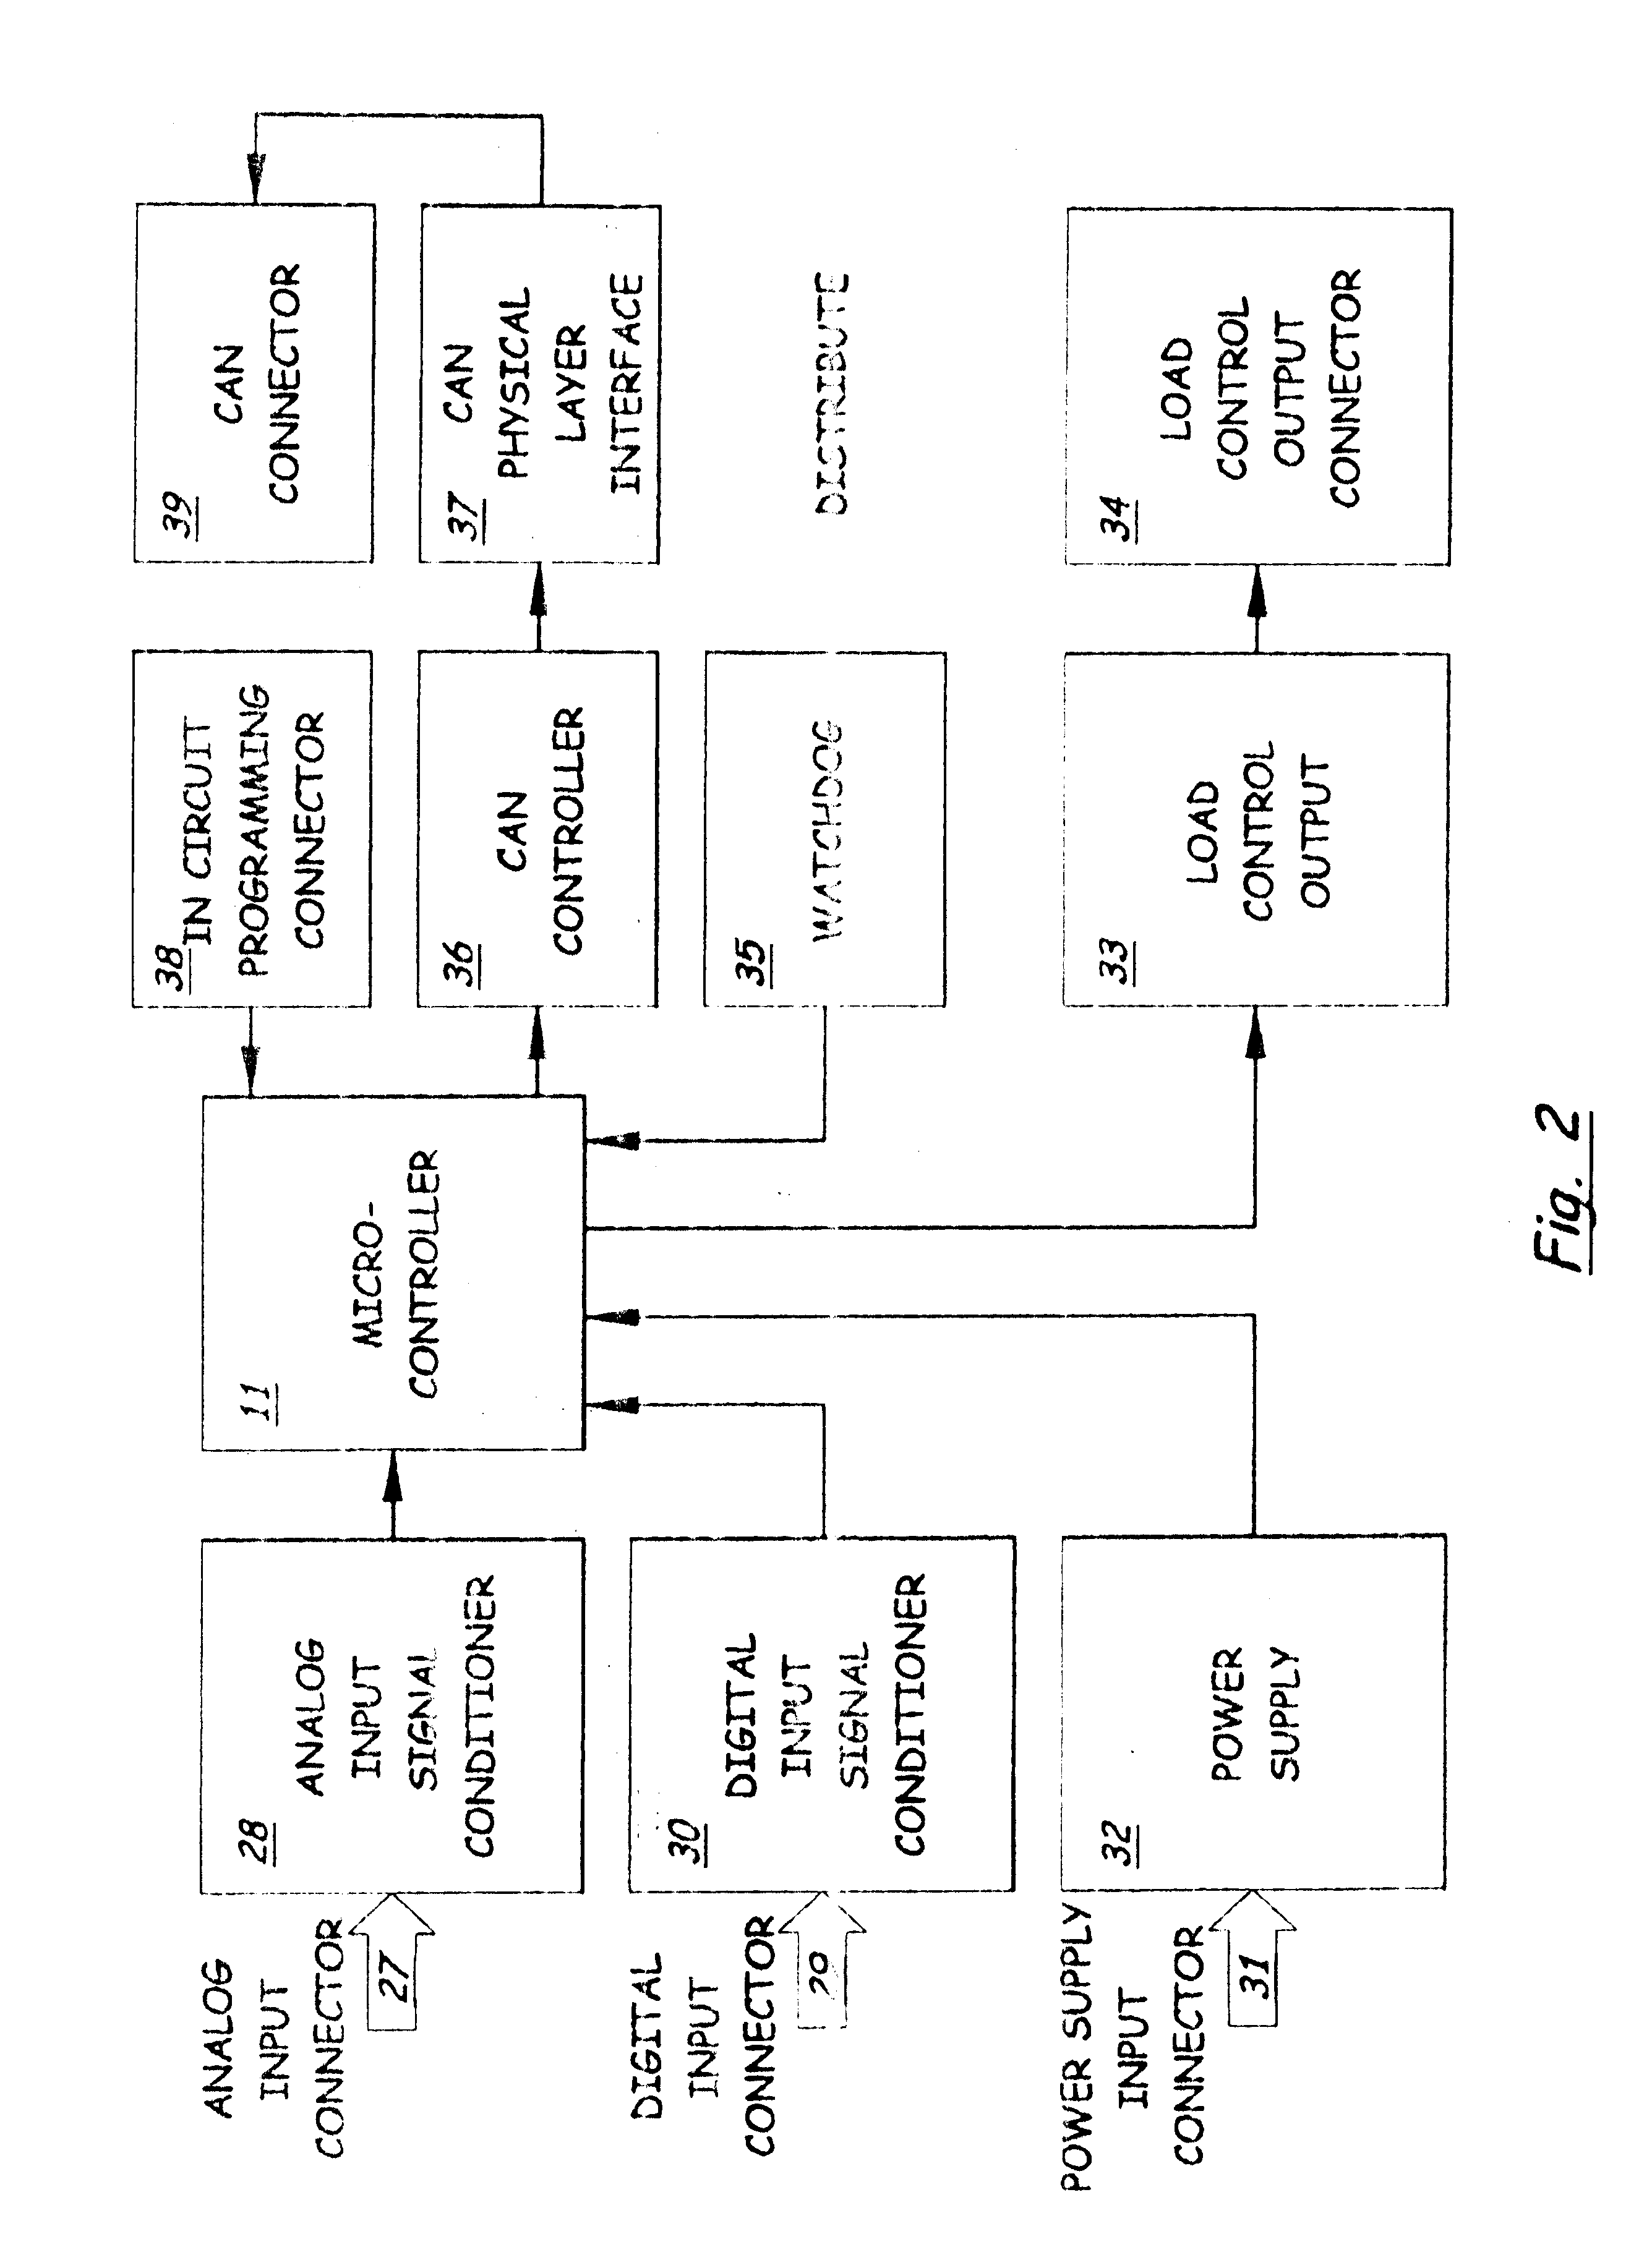 Method and handling apparatus for a vehicular electrical system